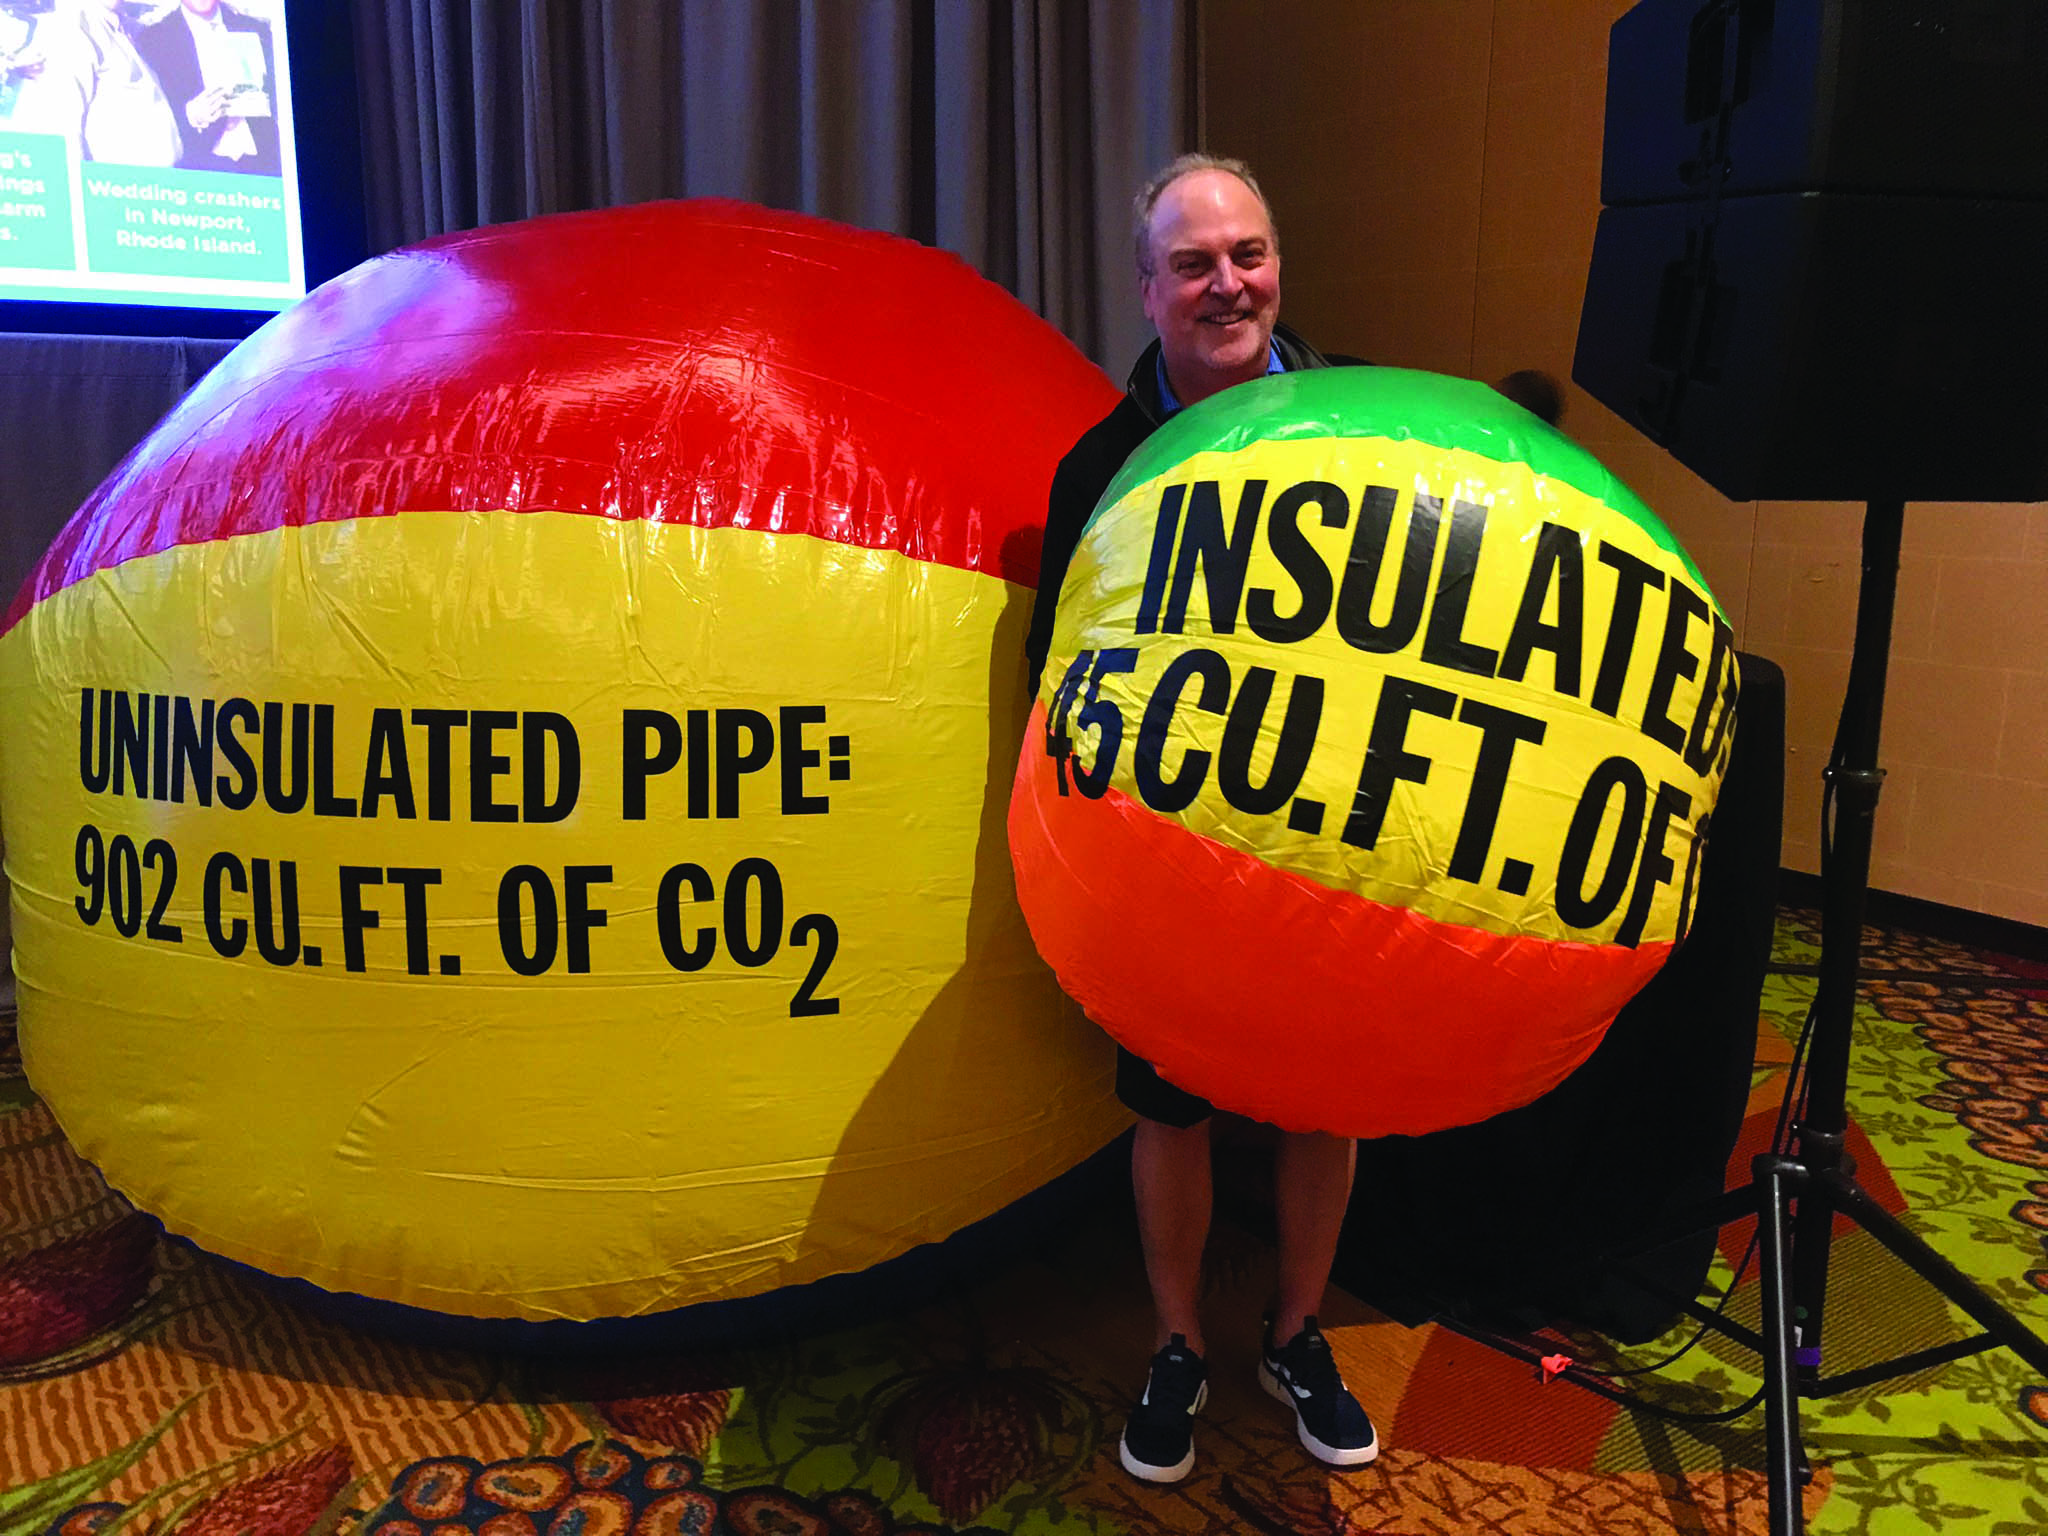 NIA President Dave Cox demostrates how insulation reduces CO2